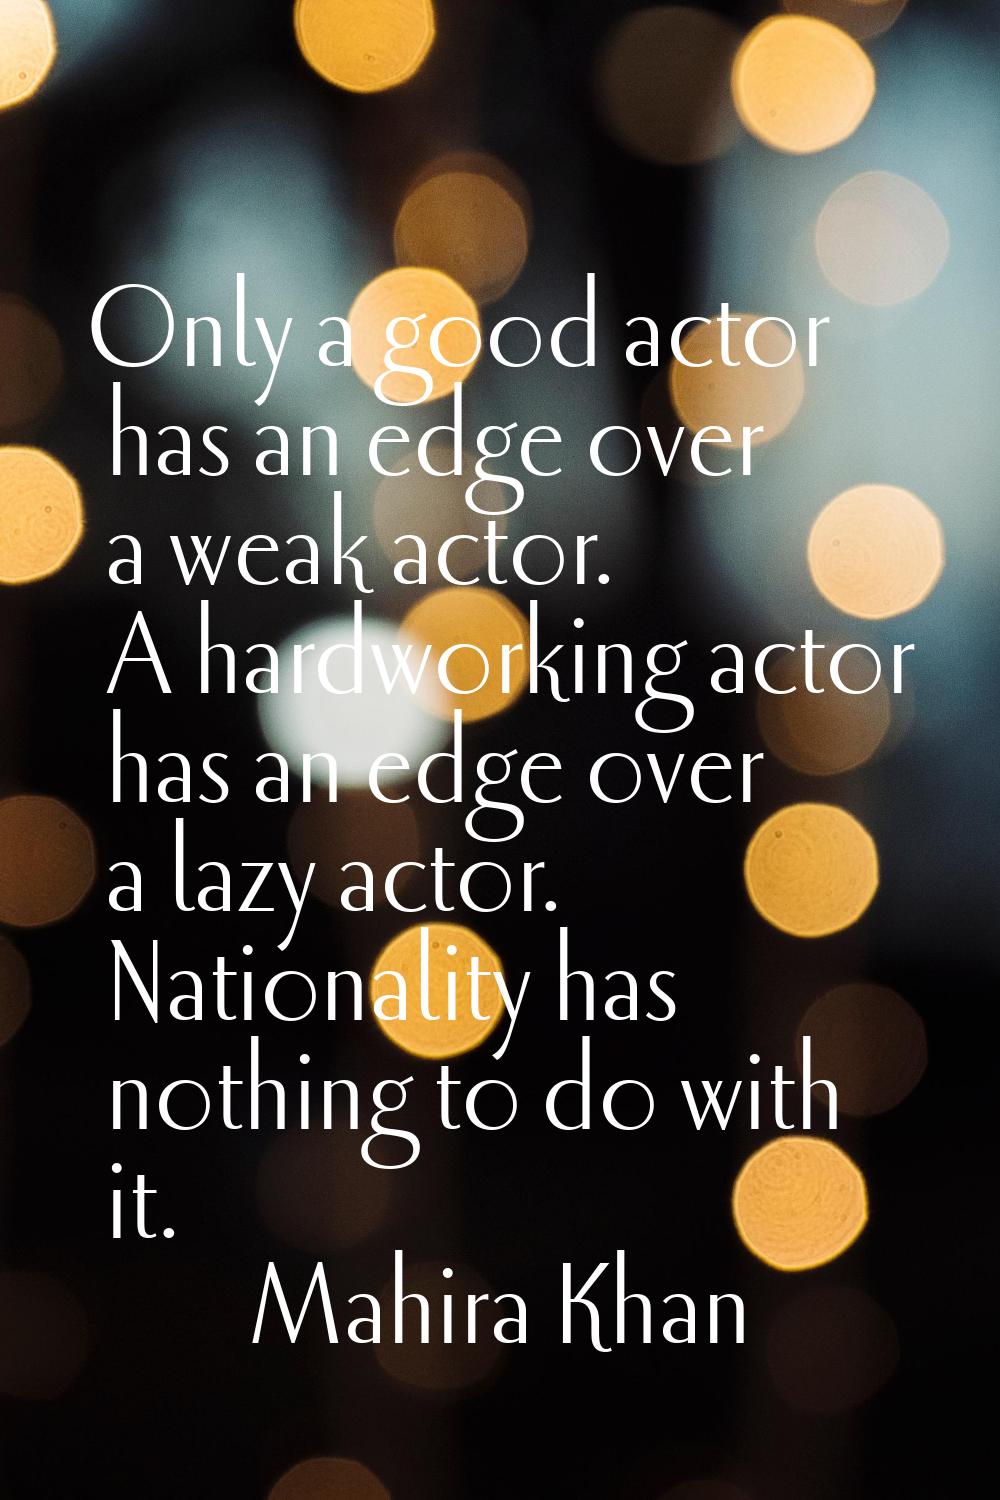 Only a good actor has an edge over a weak actor. A hardworking actor has an edge over a lazy actor.